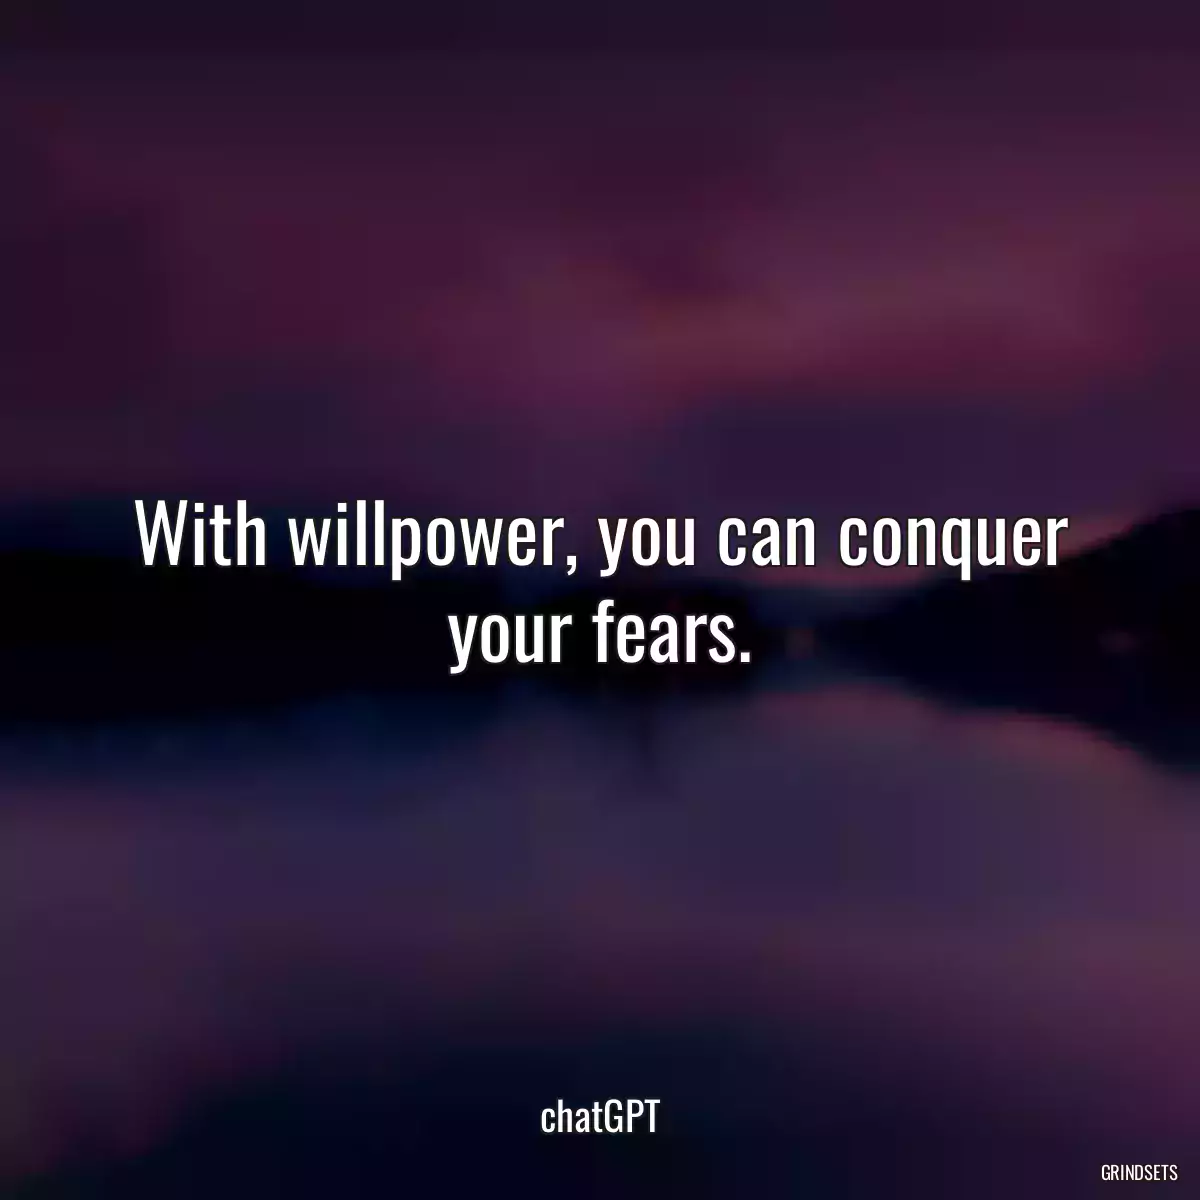 With willpower, you can conquer your fears.